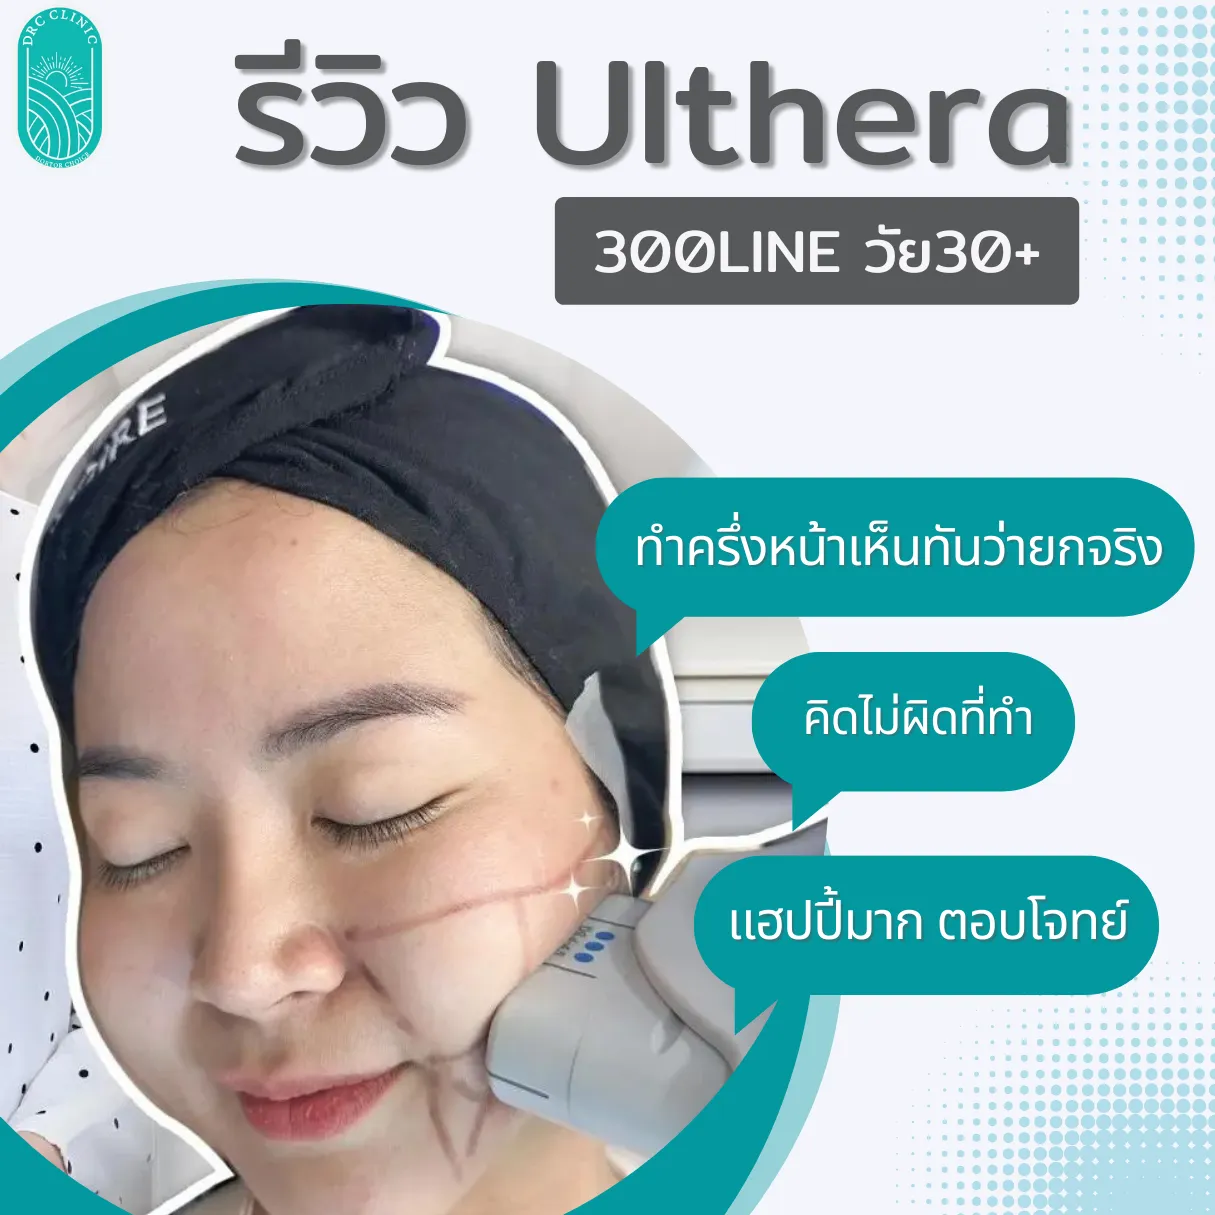 Review Ulthera Age30+ 300LINE